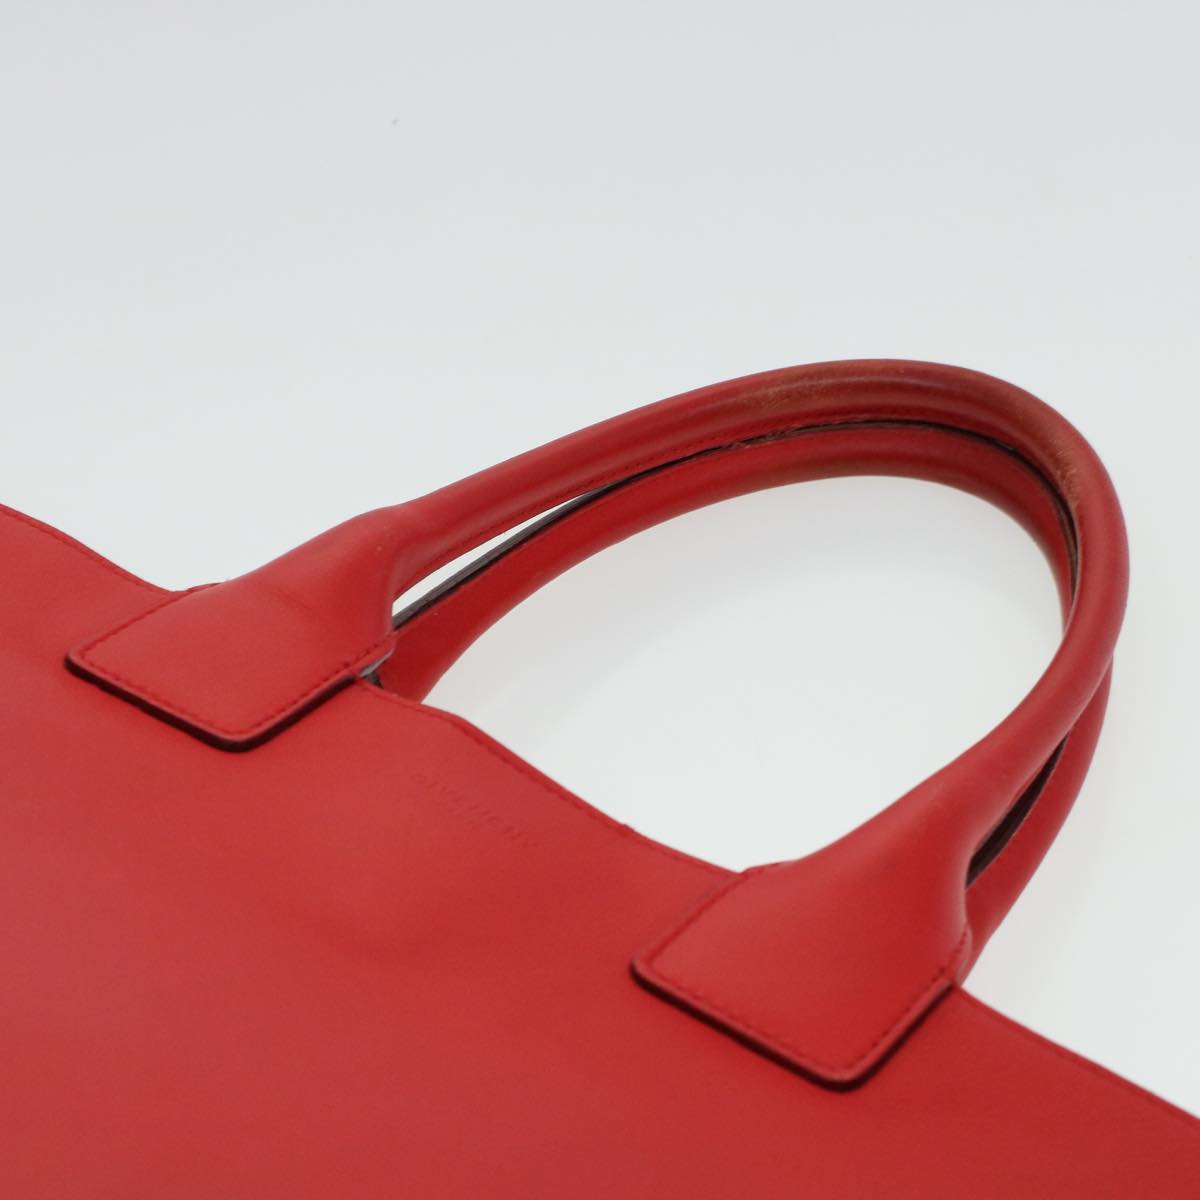 GIVENCHY Tote Bag Leather Red Auth am4390